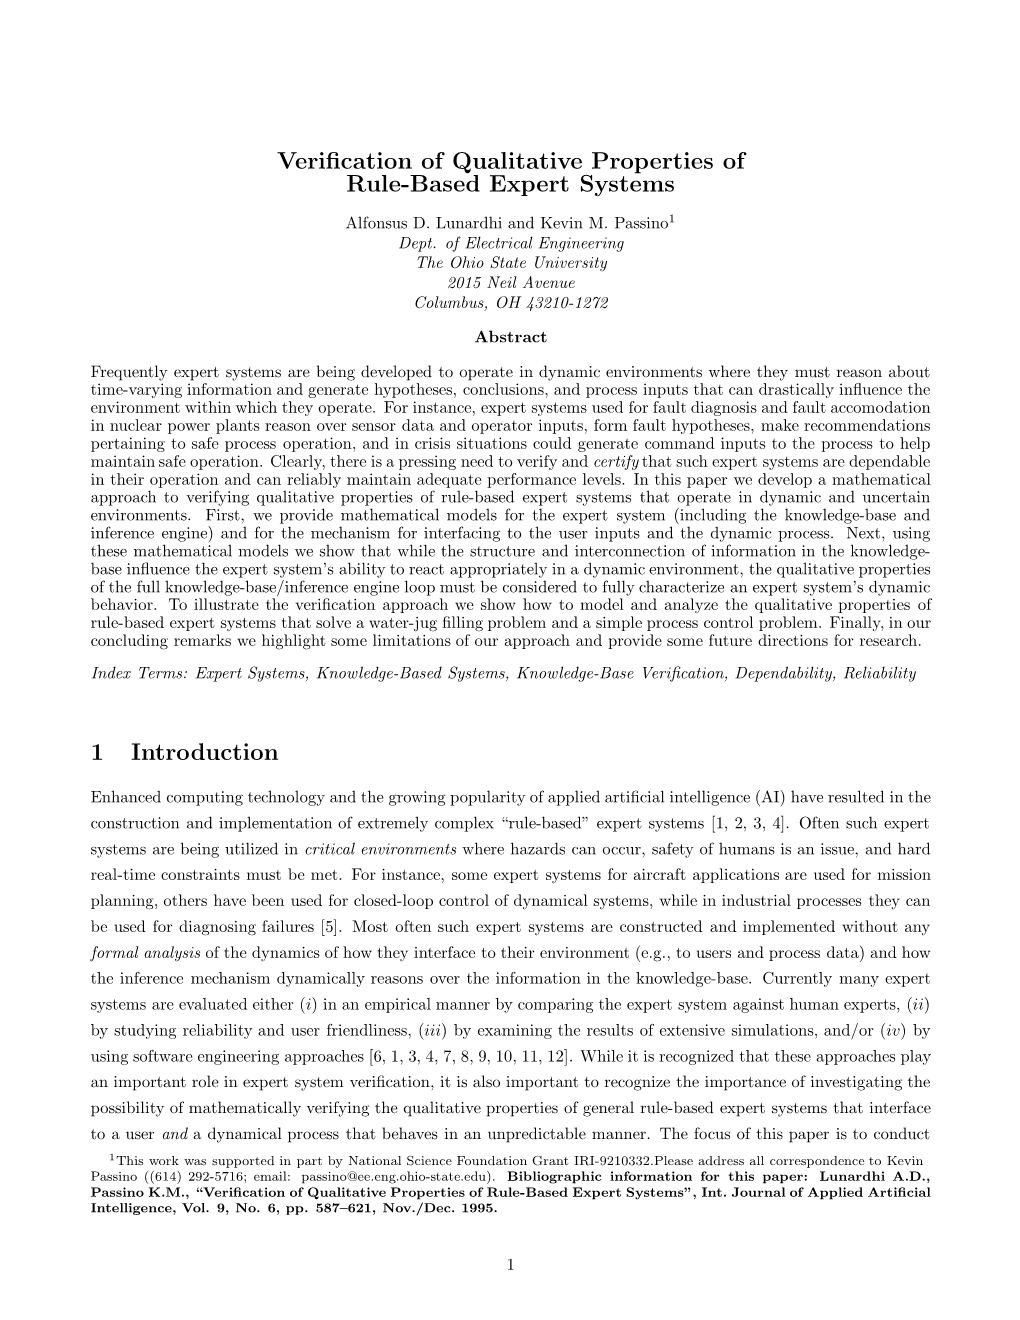 Verification of Qualitative Properties of Rule-Based Expert Systems 1